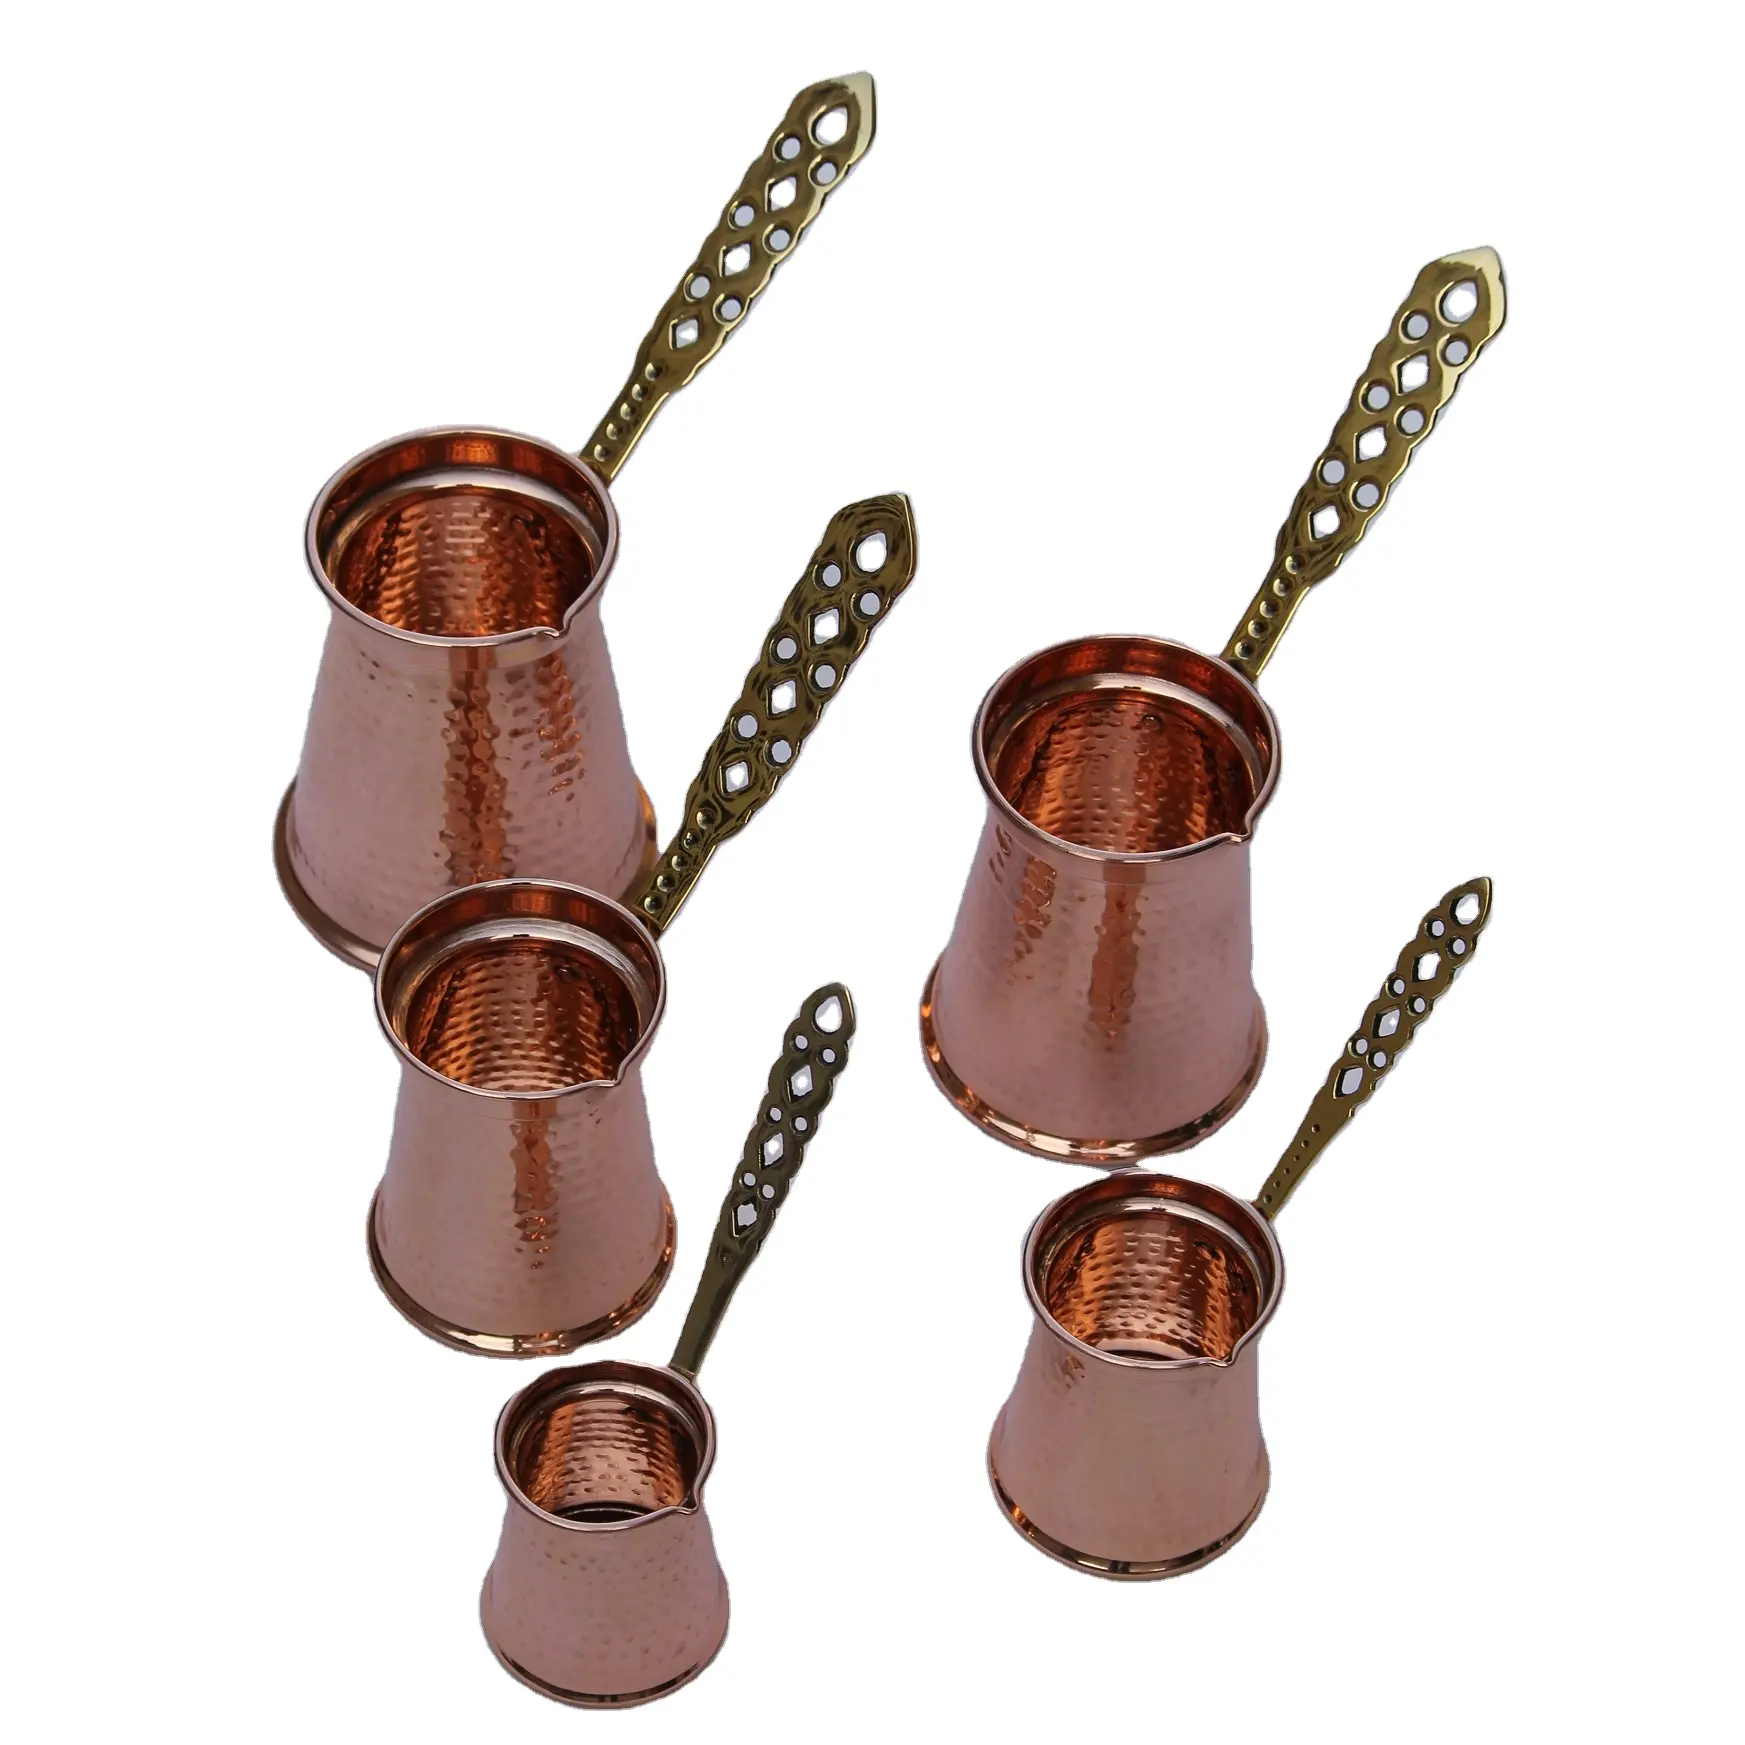 100% Pure Copper Handmade Turkish Hammered Coffee Pot (Set of 3) With Brass Handle Wholesale Manufacturer And Exporter